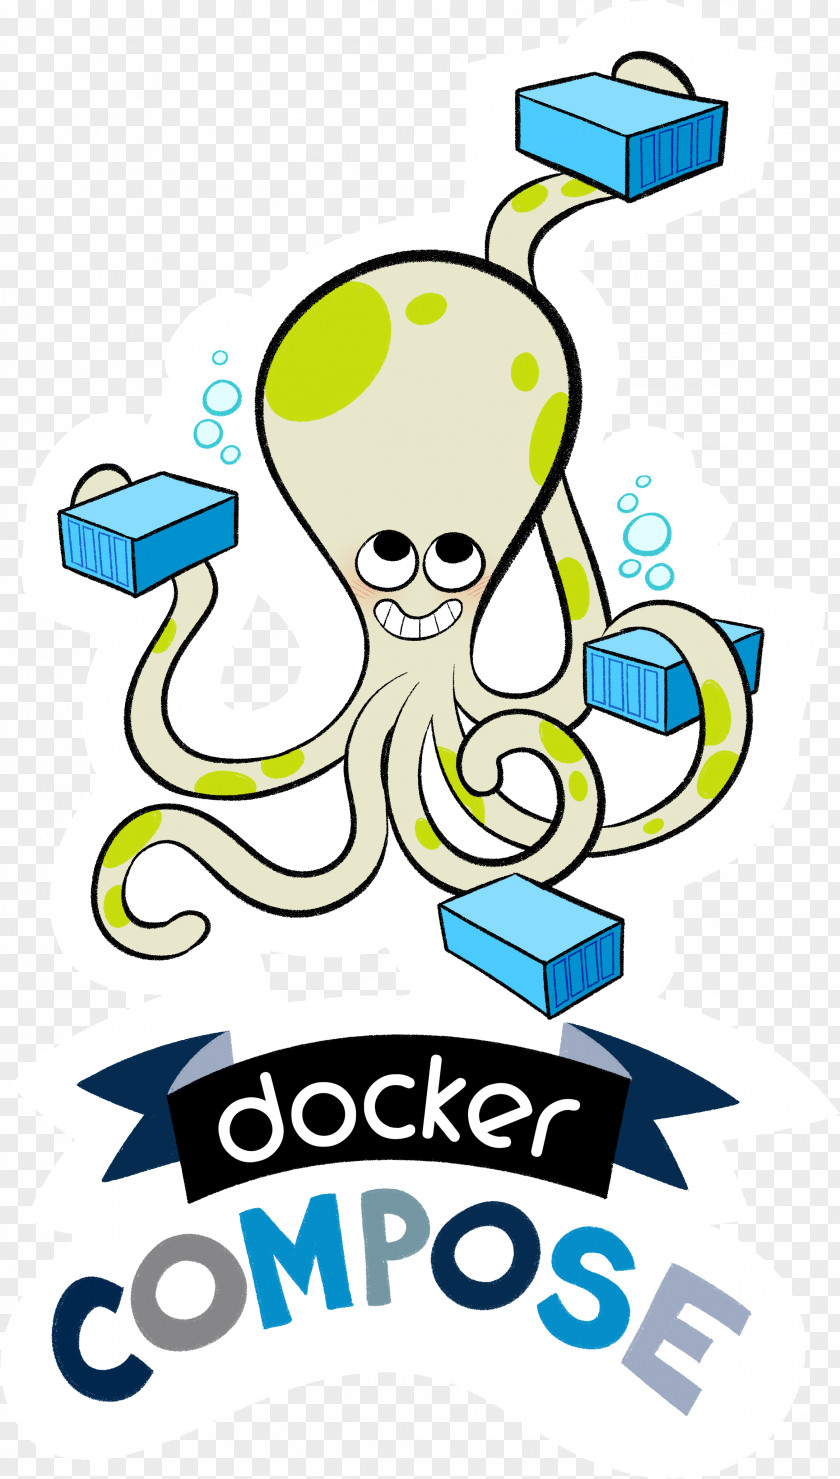 Convenient Clipart Docker YAML Application Software Vagrant Ruby On Rails PNG